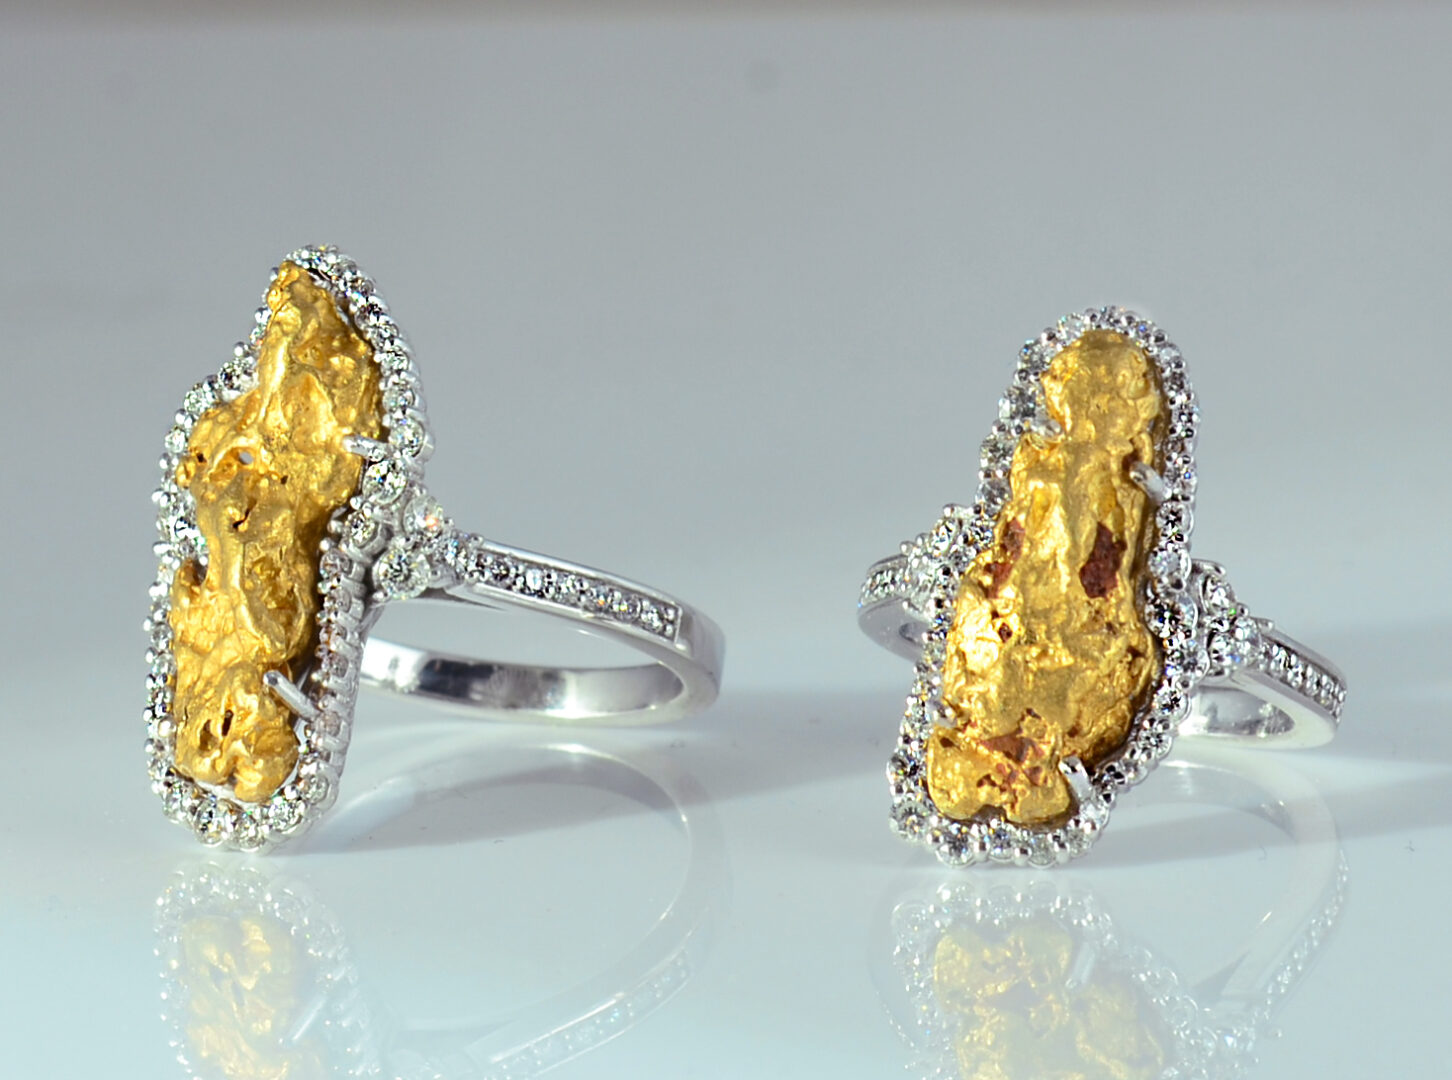 SPECIAL ORDER3 14KT WG NUGGET RINGS -82 CTS